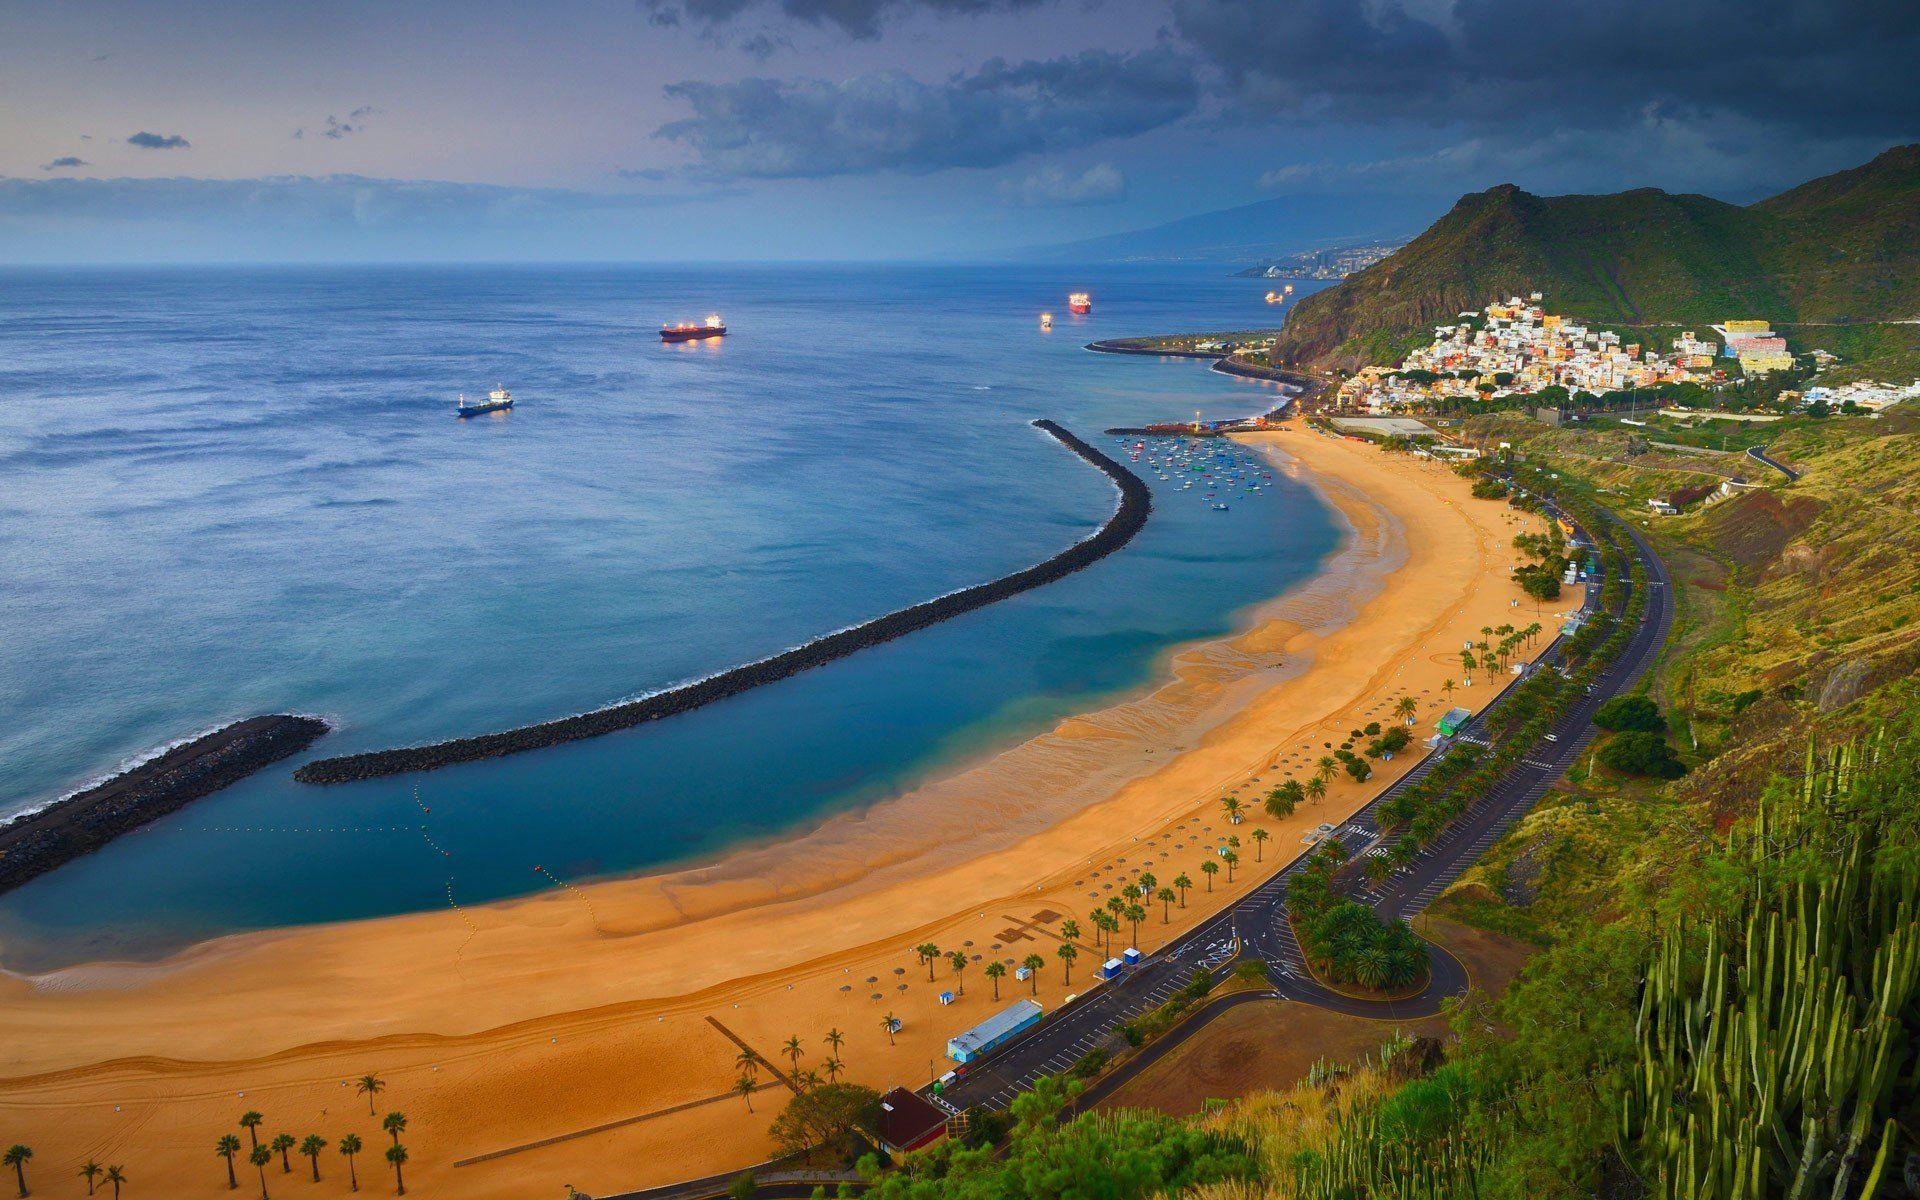 Beach in Tenerife in the Canary Islands HD Wallpaper. Background